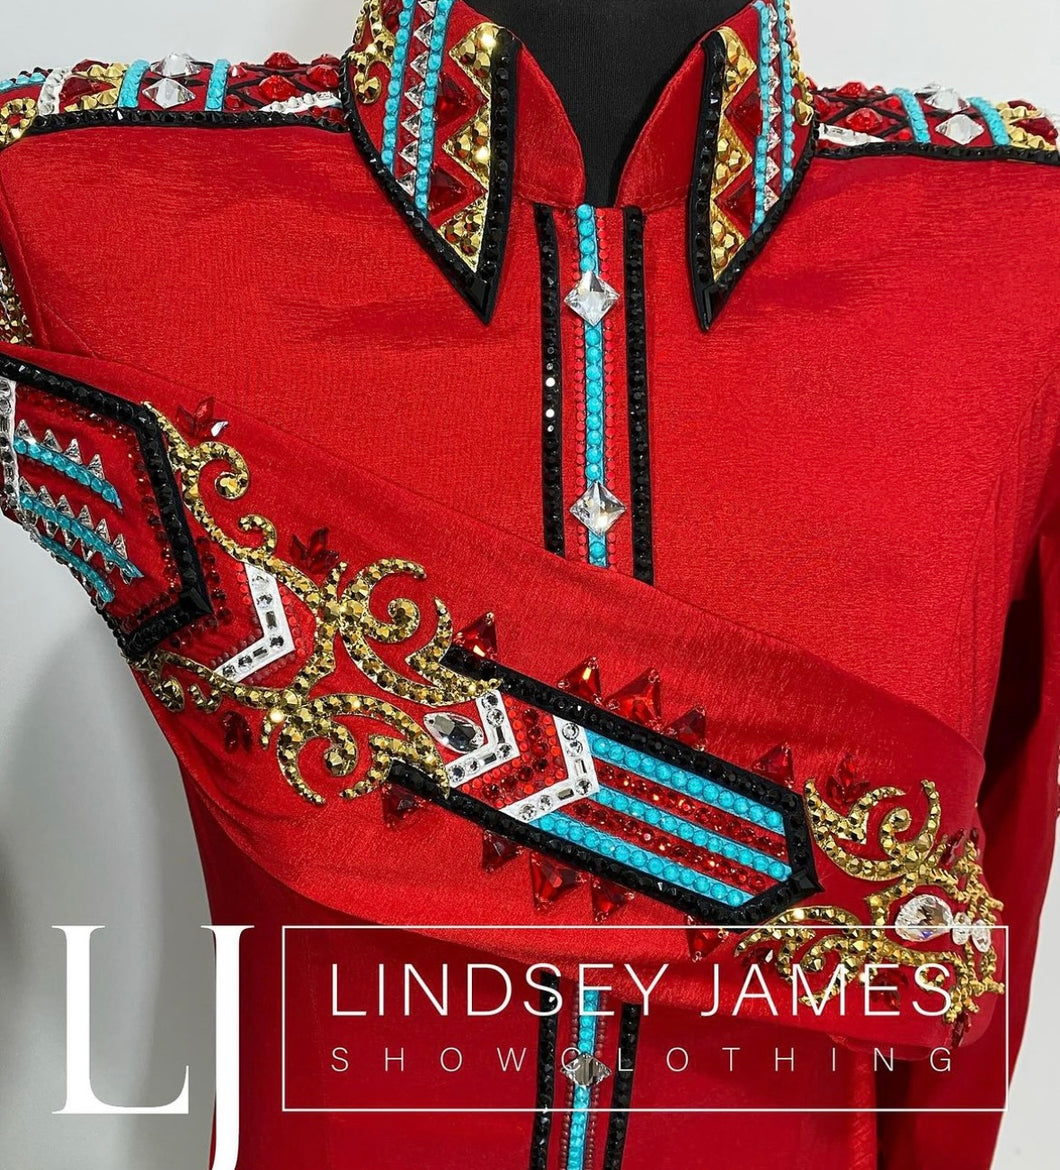 Lindsey James Show Clothing Red, Light Blue & Gold Full Sleeve Day Shirt - Small